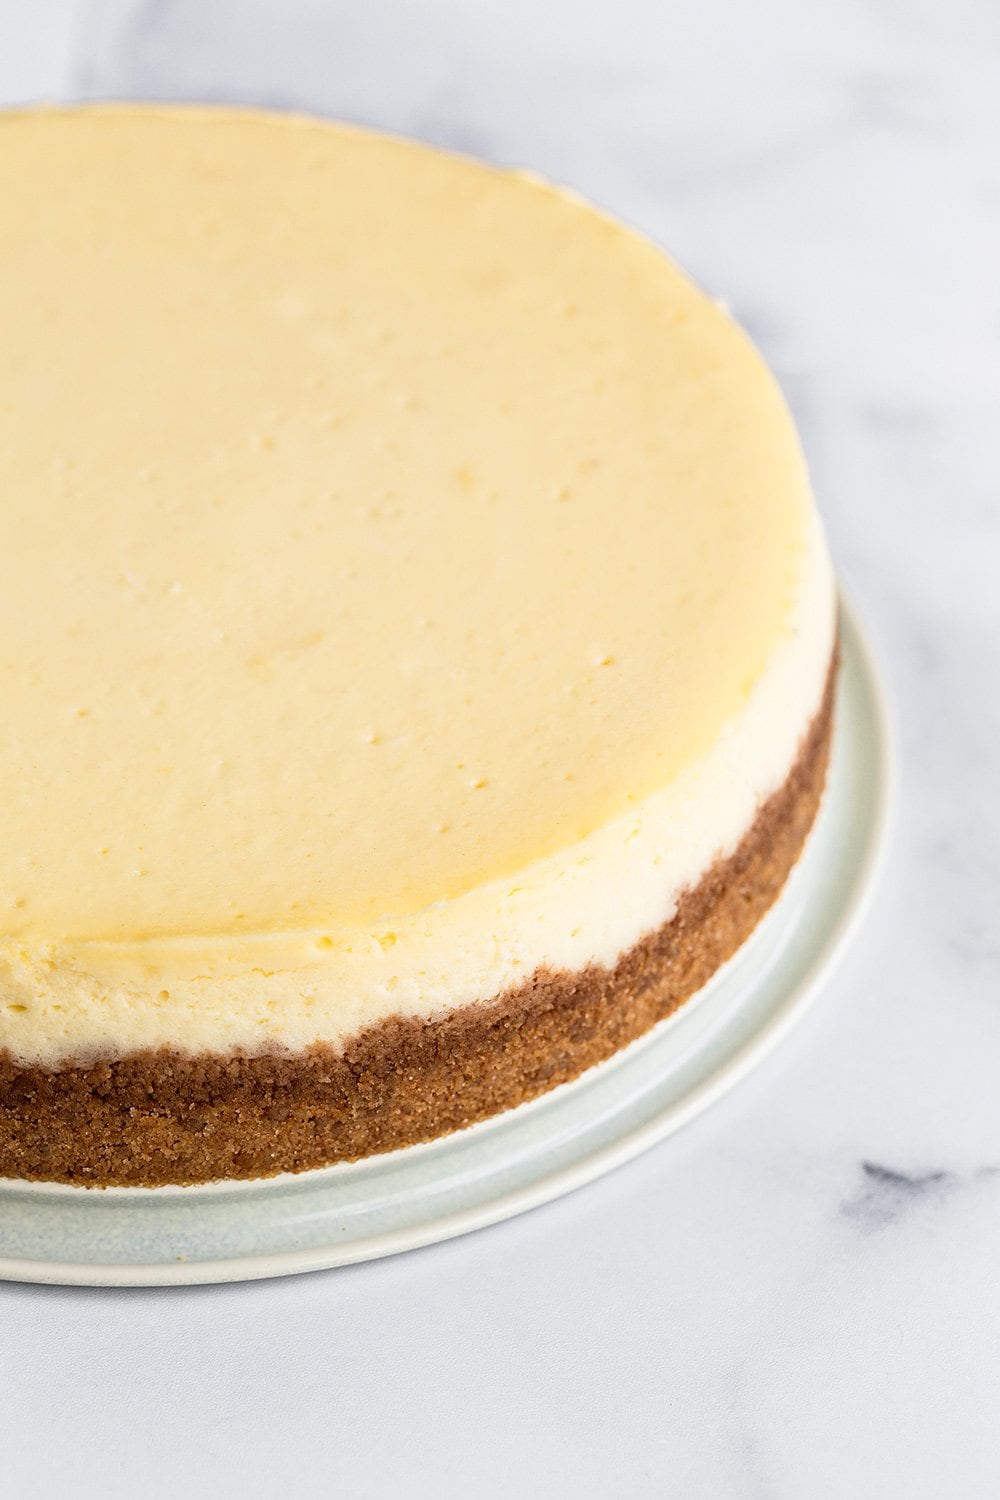 perfectly smooth and creamy cheesecake with no cracks and a graham cracker crust